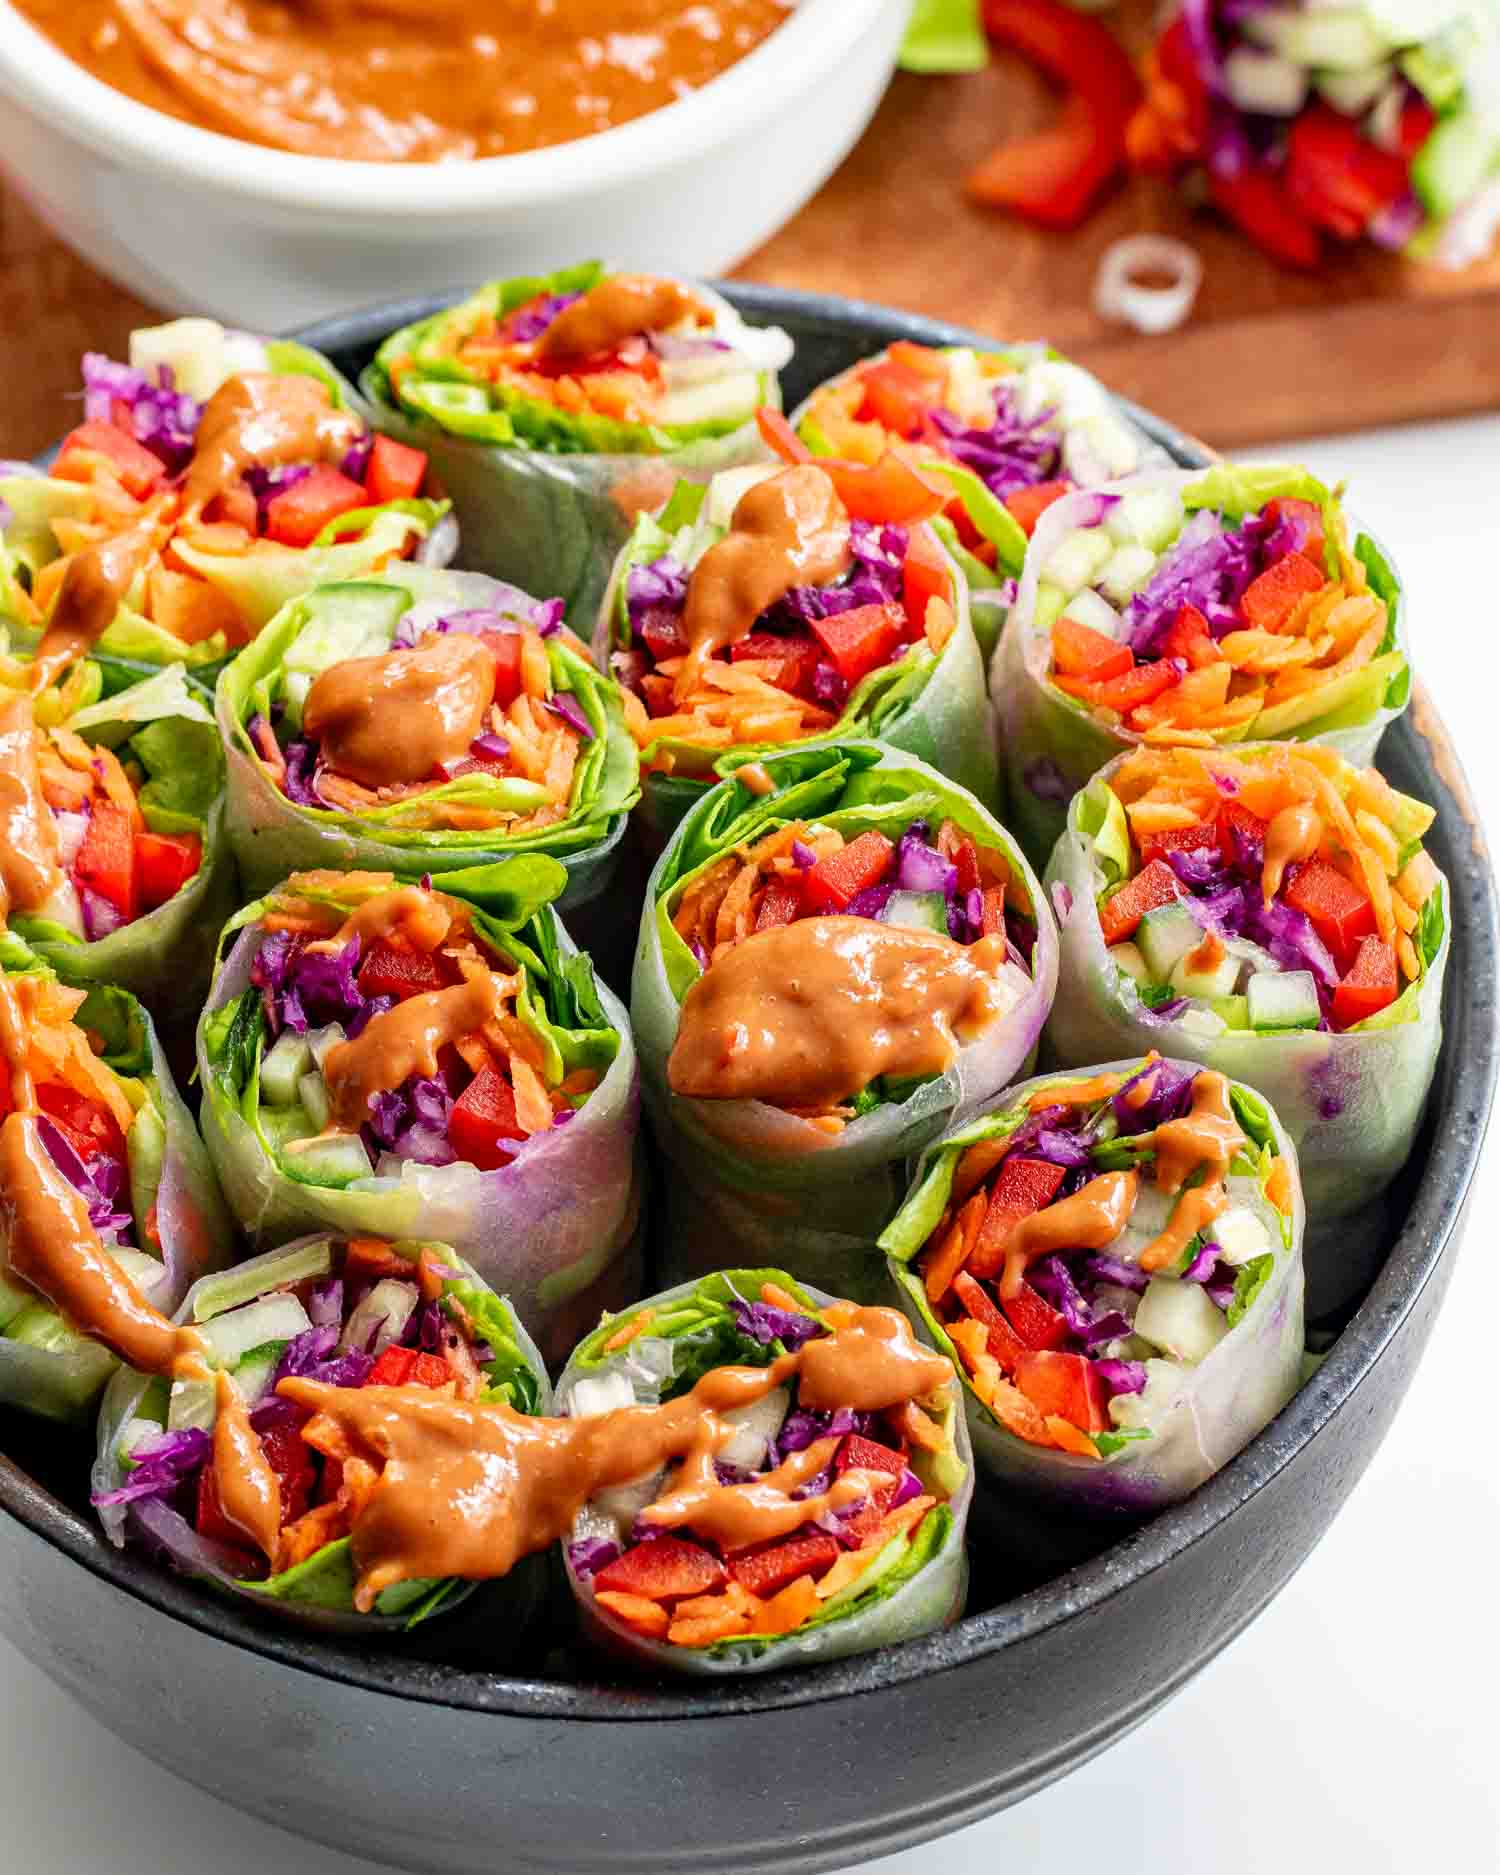 spring rolls cut in half in a black bowl with peanut sauce.